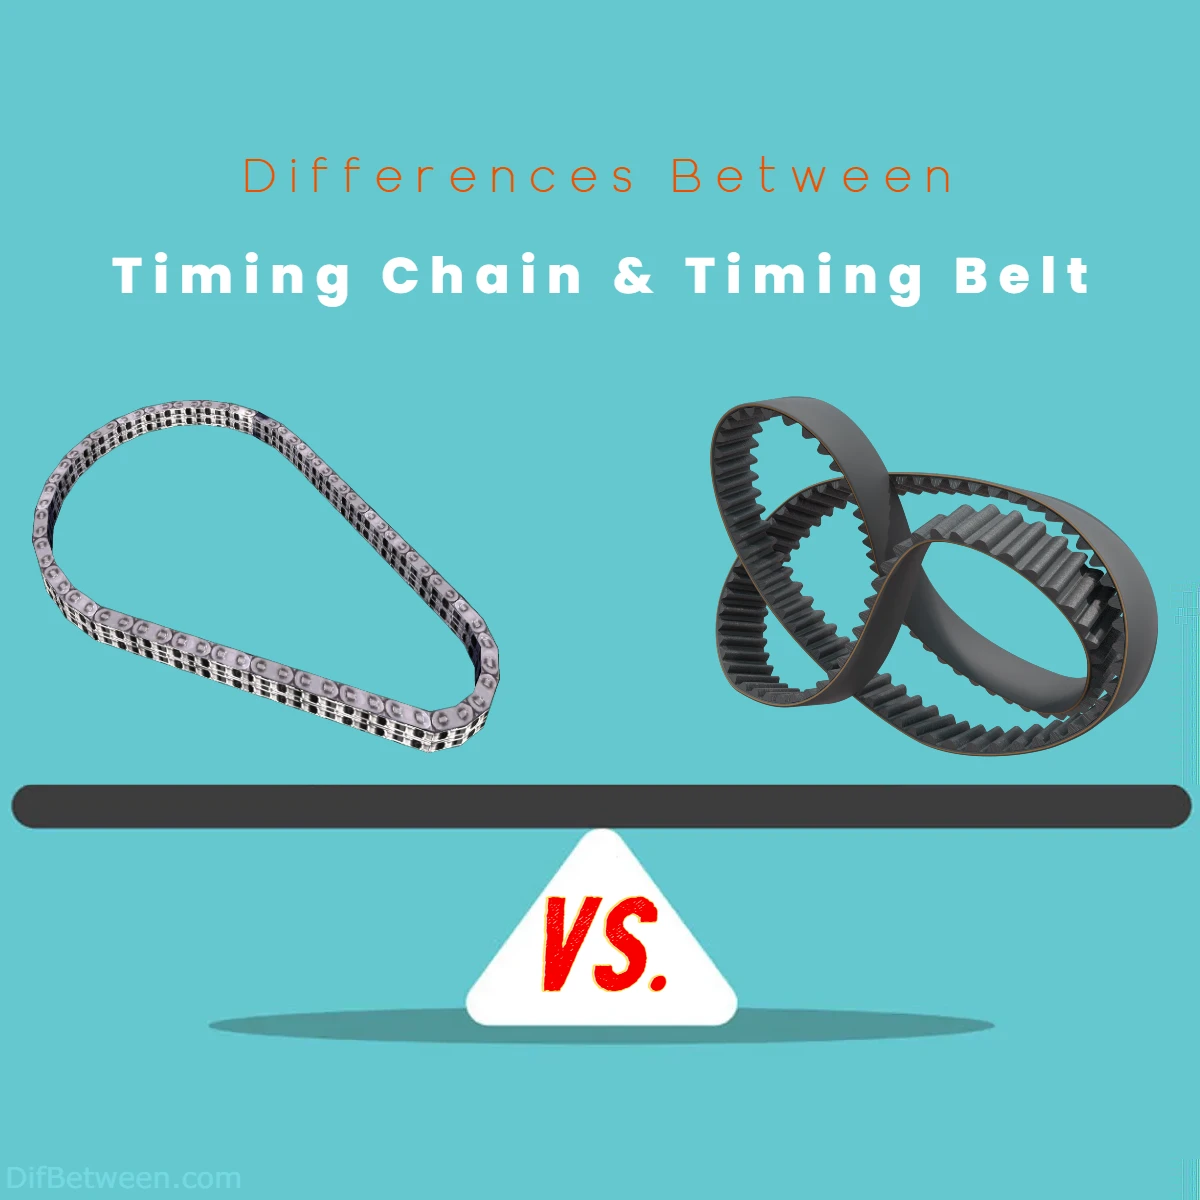 Differences Between Timing Chain vs Timing Belt